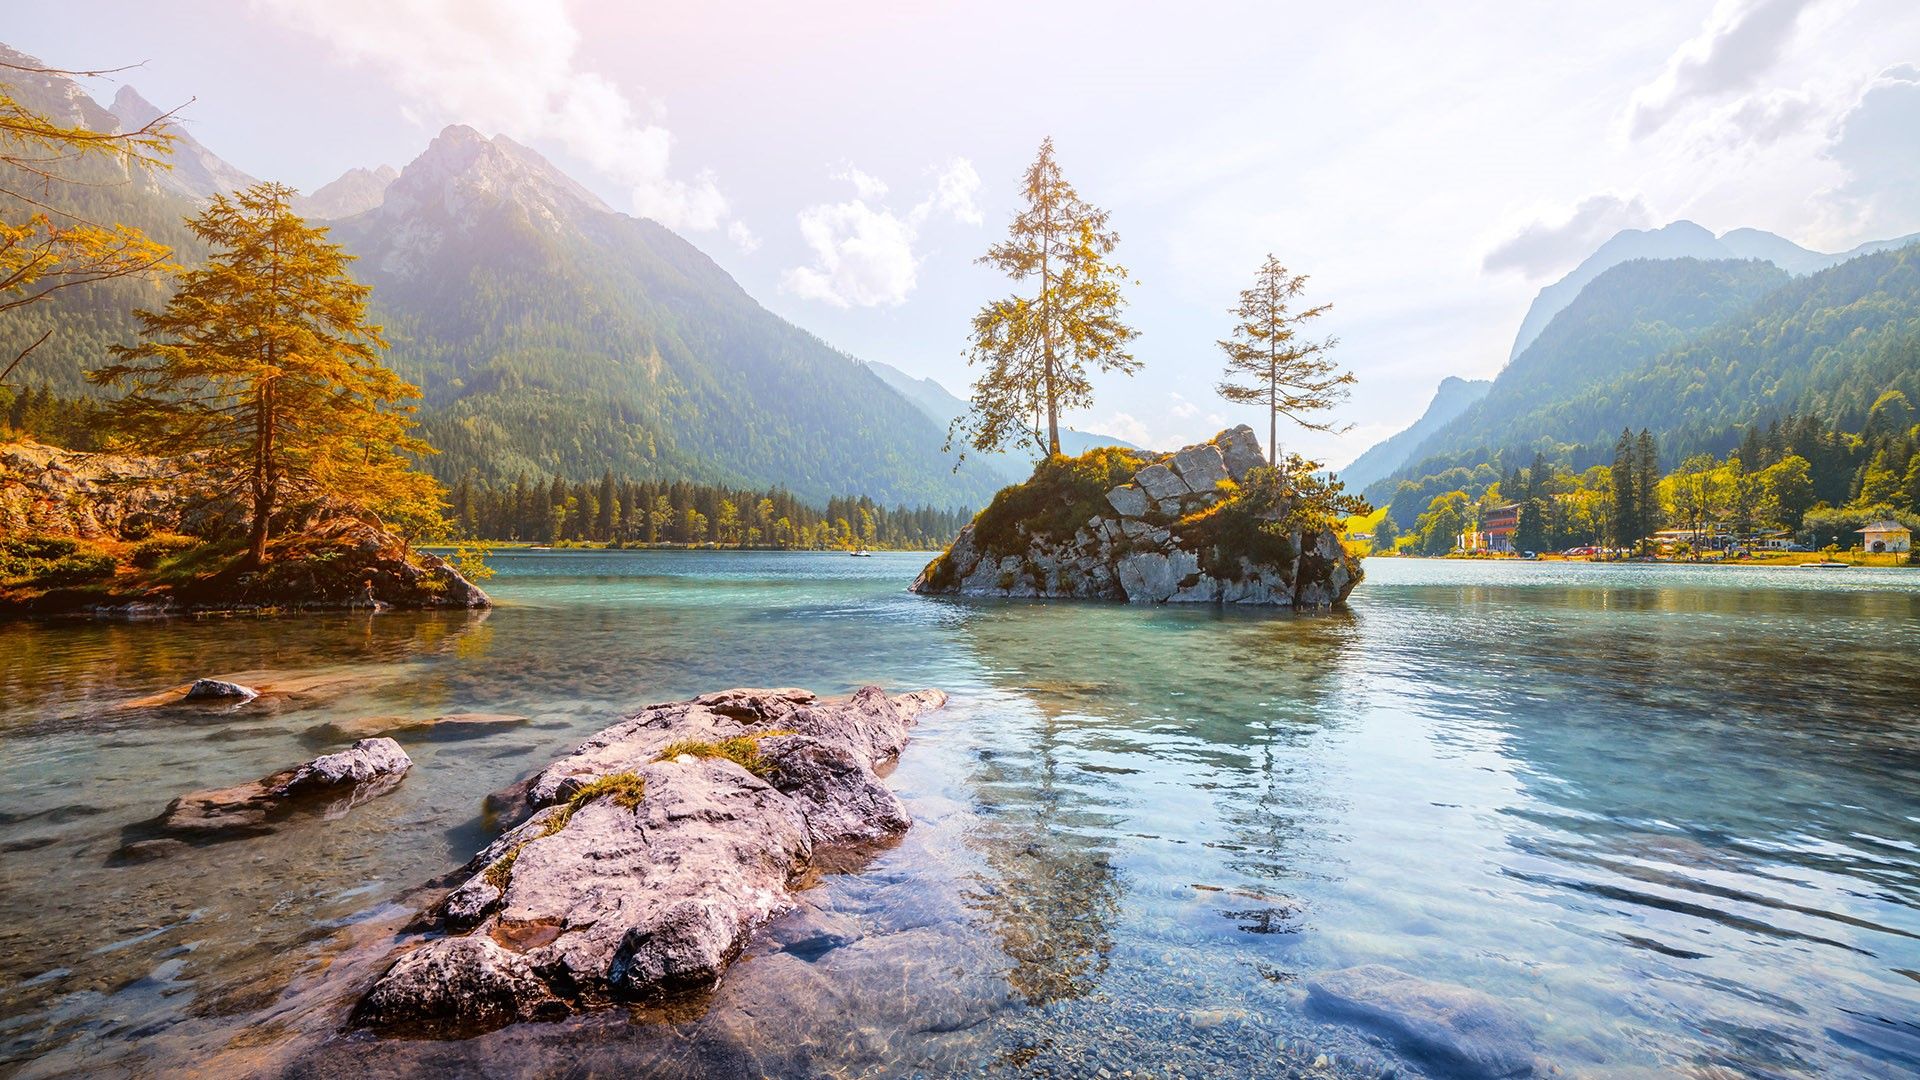 Wallpaper, forest, nature, landscape, summer, mountains, valley, rocks, water ripples, Germany, Lake Hintersee 1920x1080